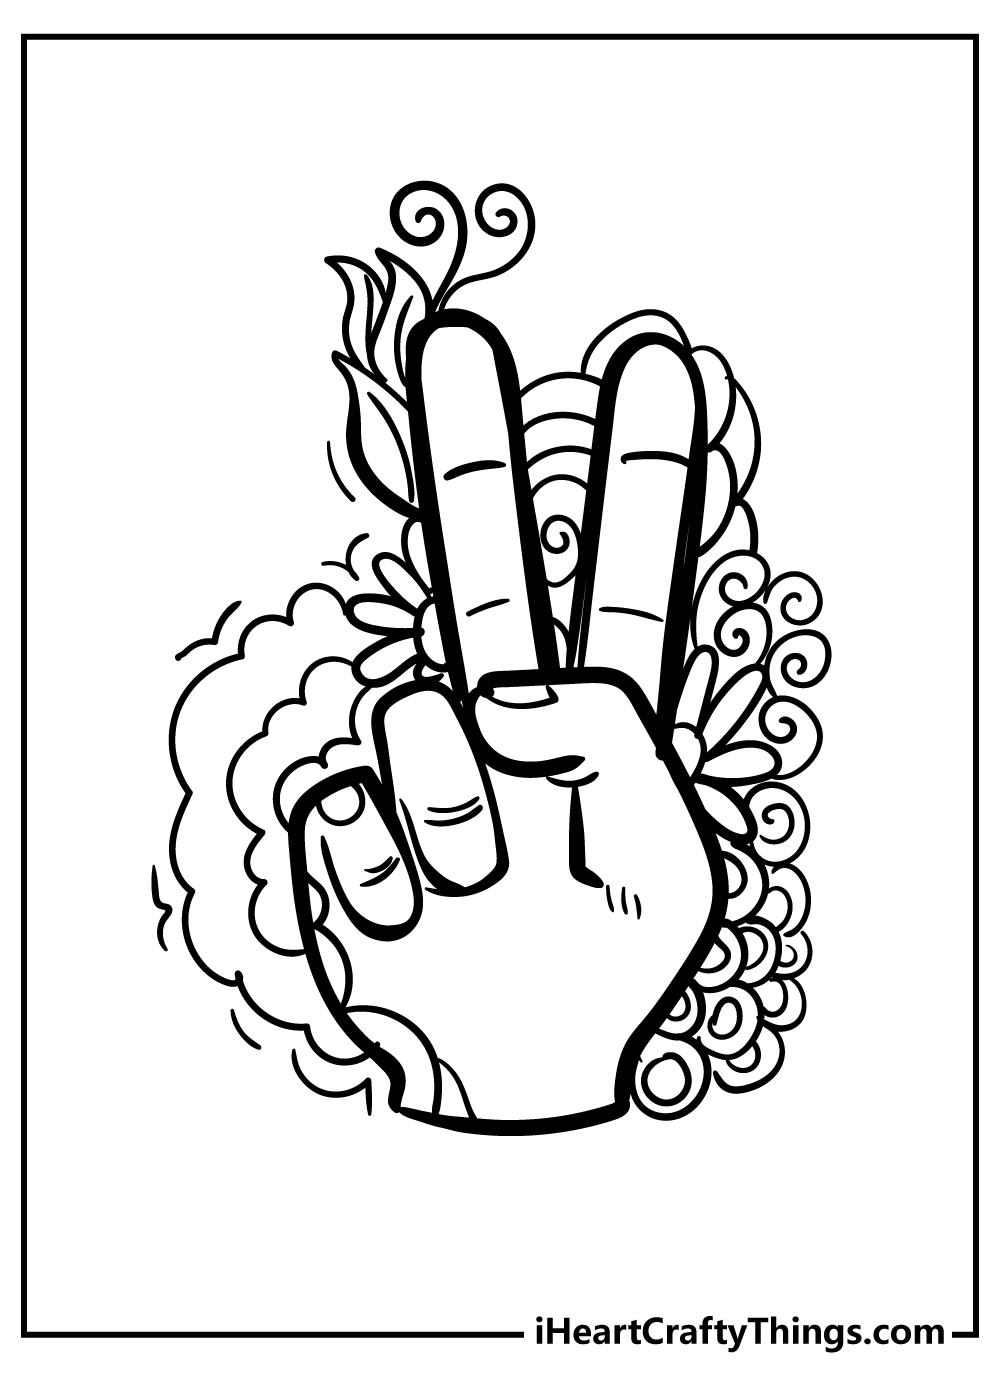 Peace Coloring Sheet for children free download